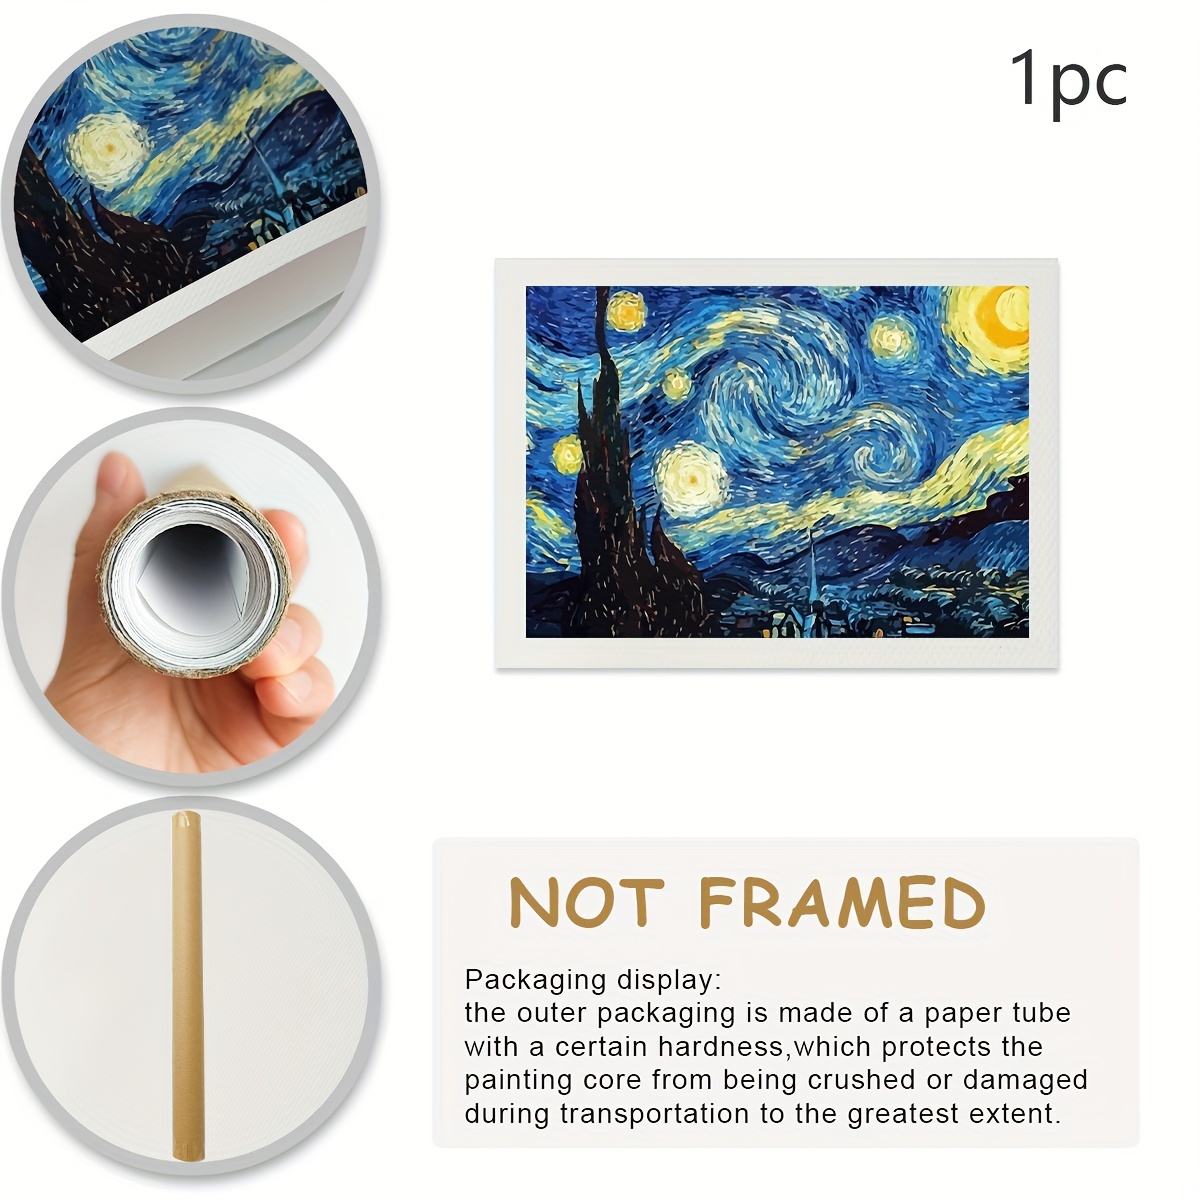 Van Gough Starry Night Decorative Diamond Painting Release Papers